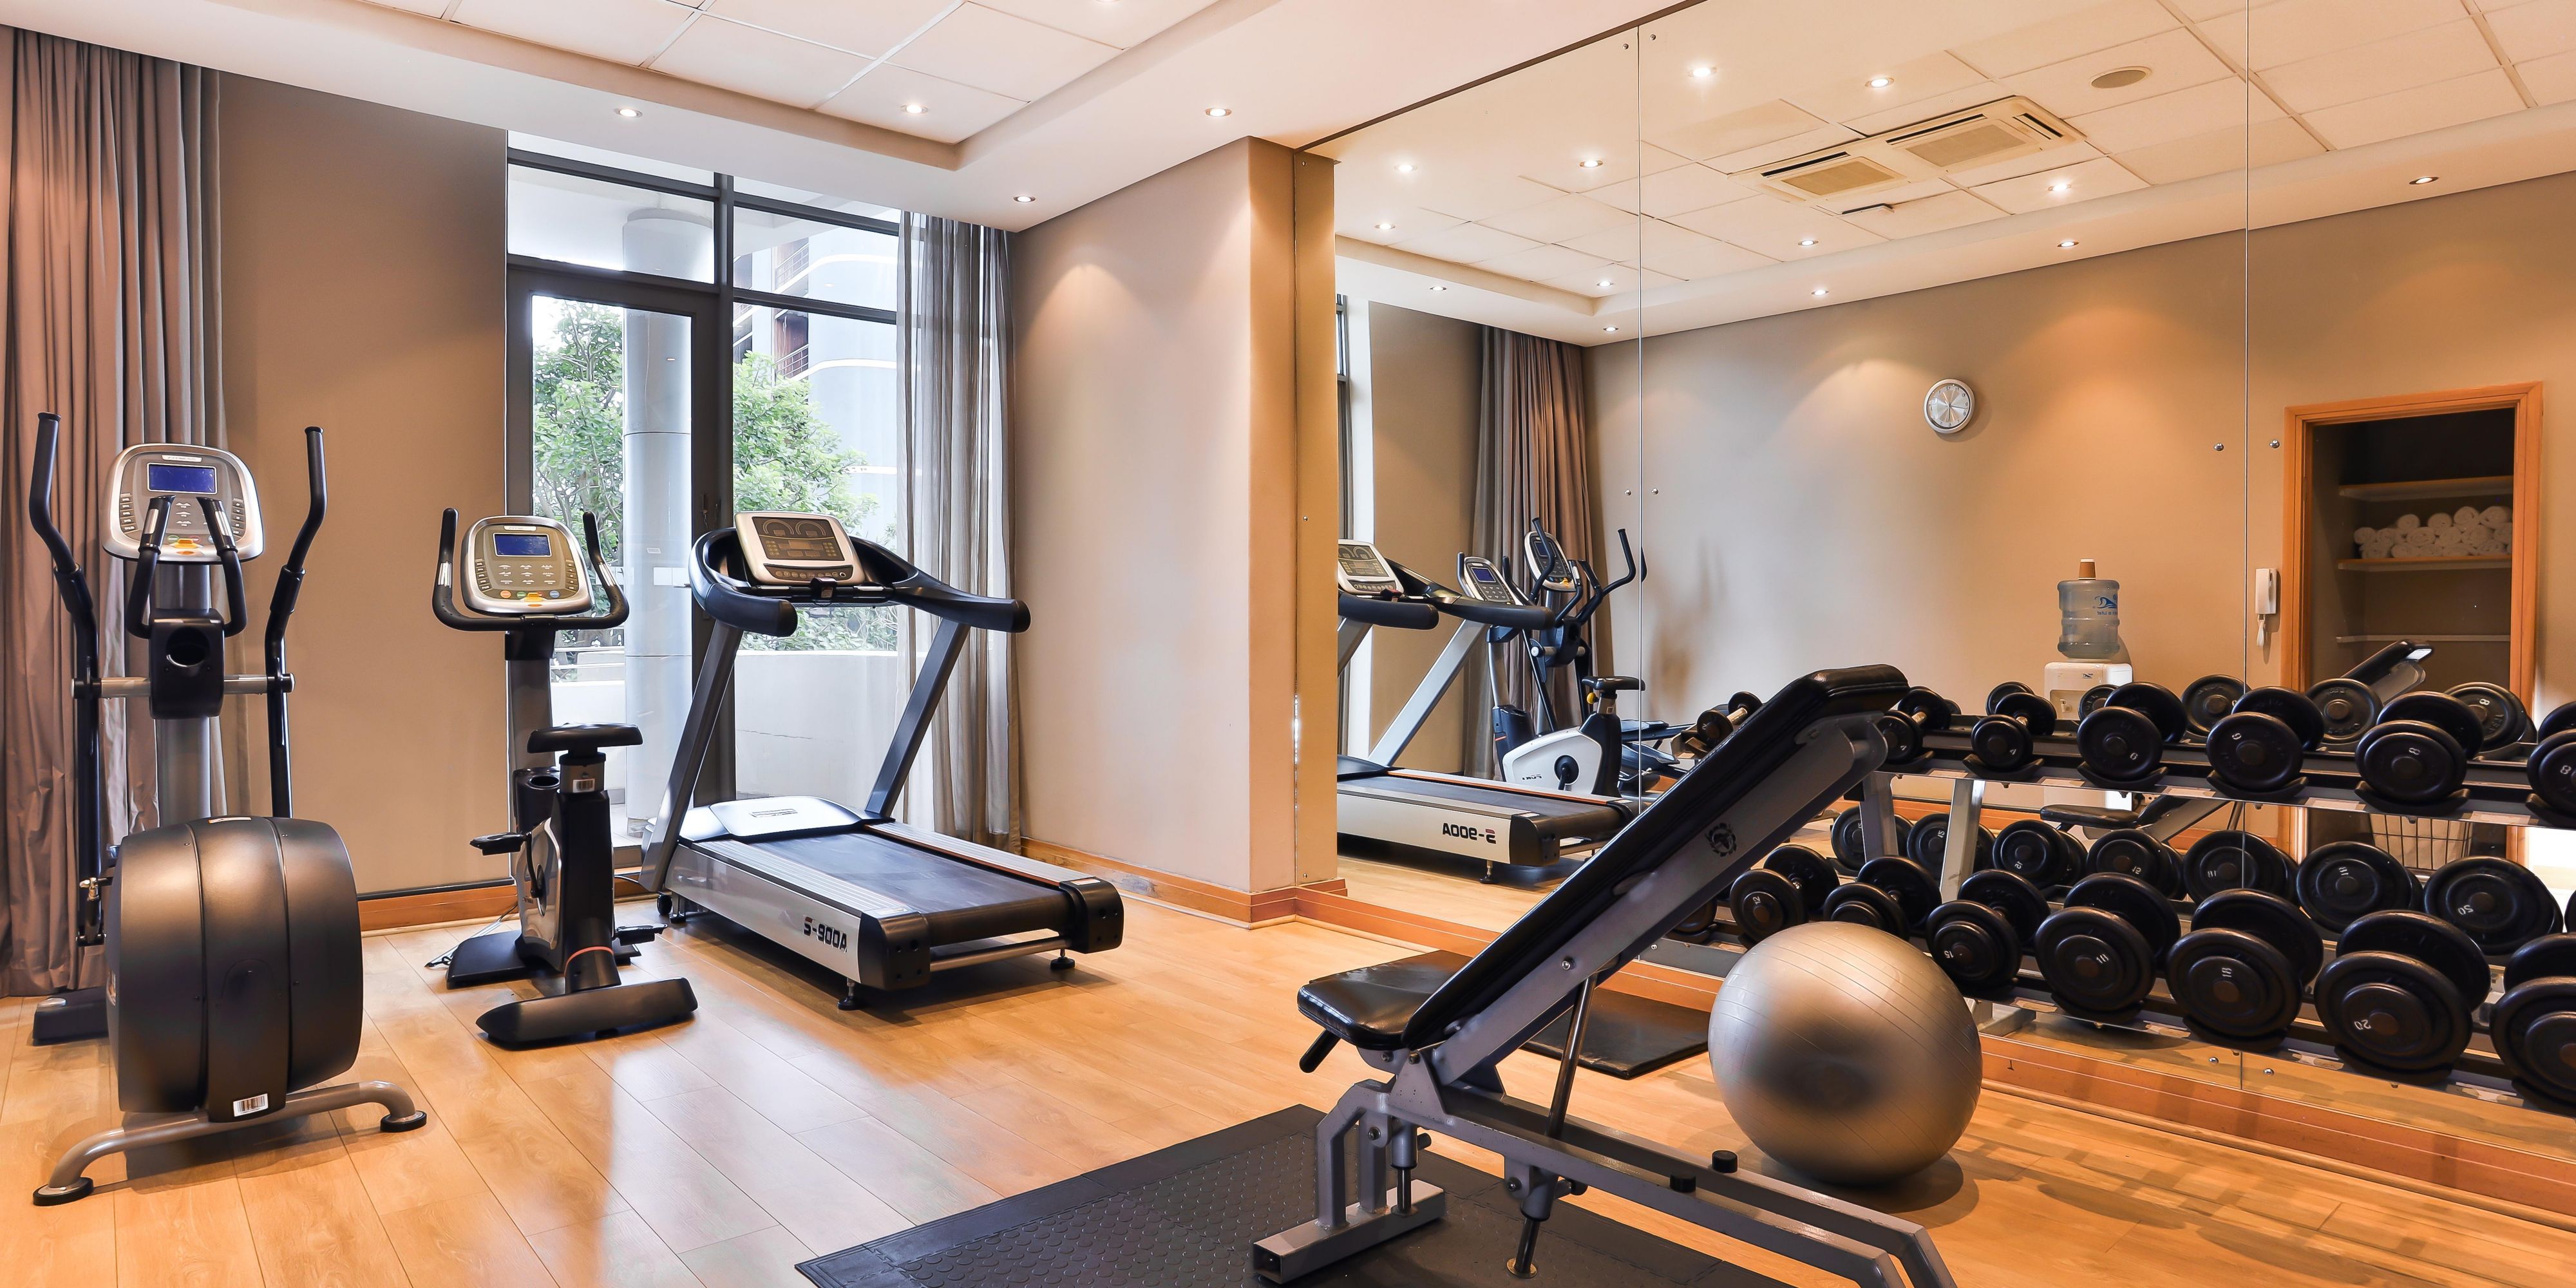 No need to break your gym routine when travelling. Make use of our Mini-Gym on the first floor near reception, and keep on track with your exercise regime.  We have a treadmill, bike and orbital trainer, as well as a free weights section.  